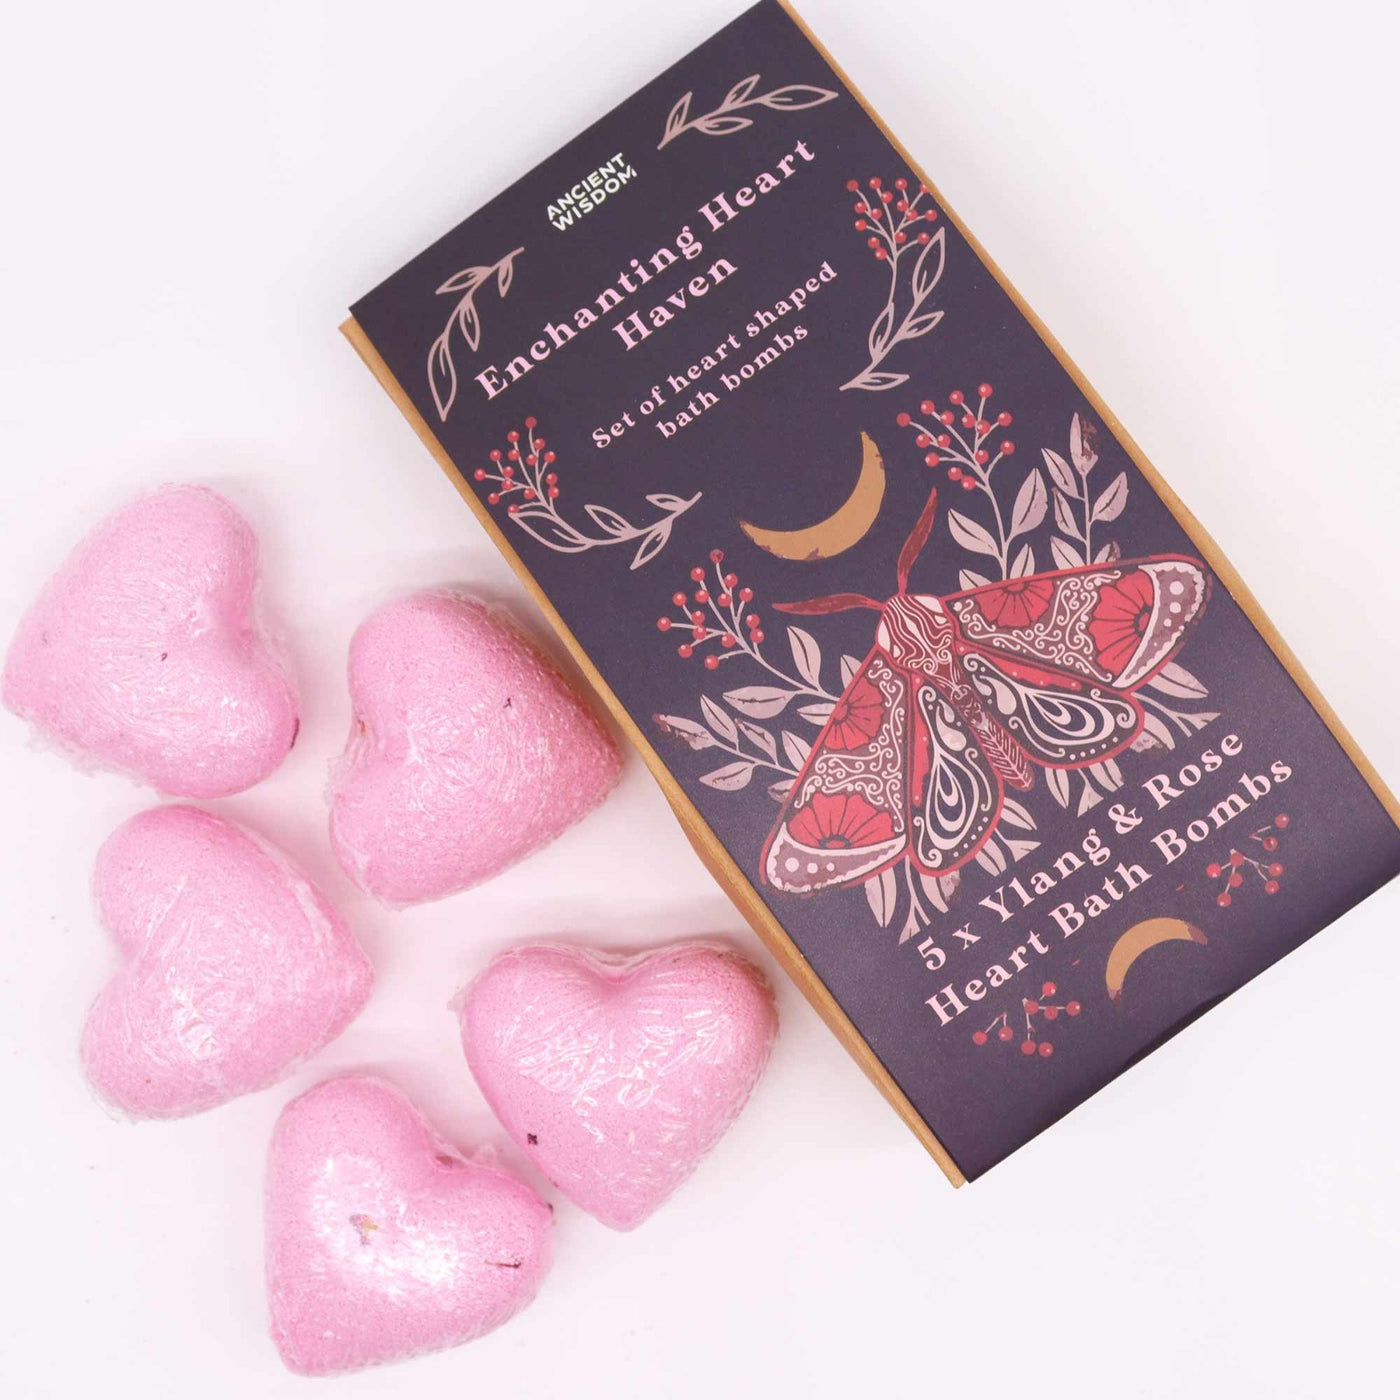 Bath Heart Shaped Bath Bombs Gift Set Ylang And Rose Scented.